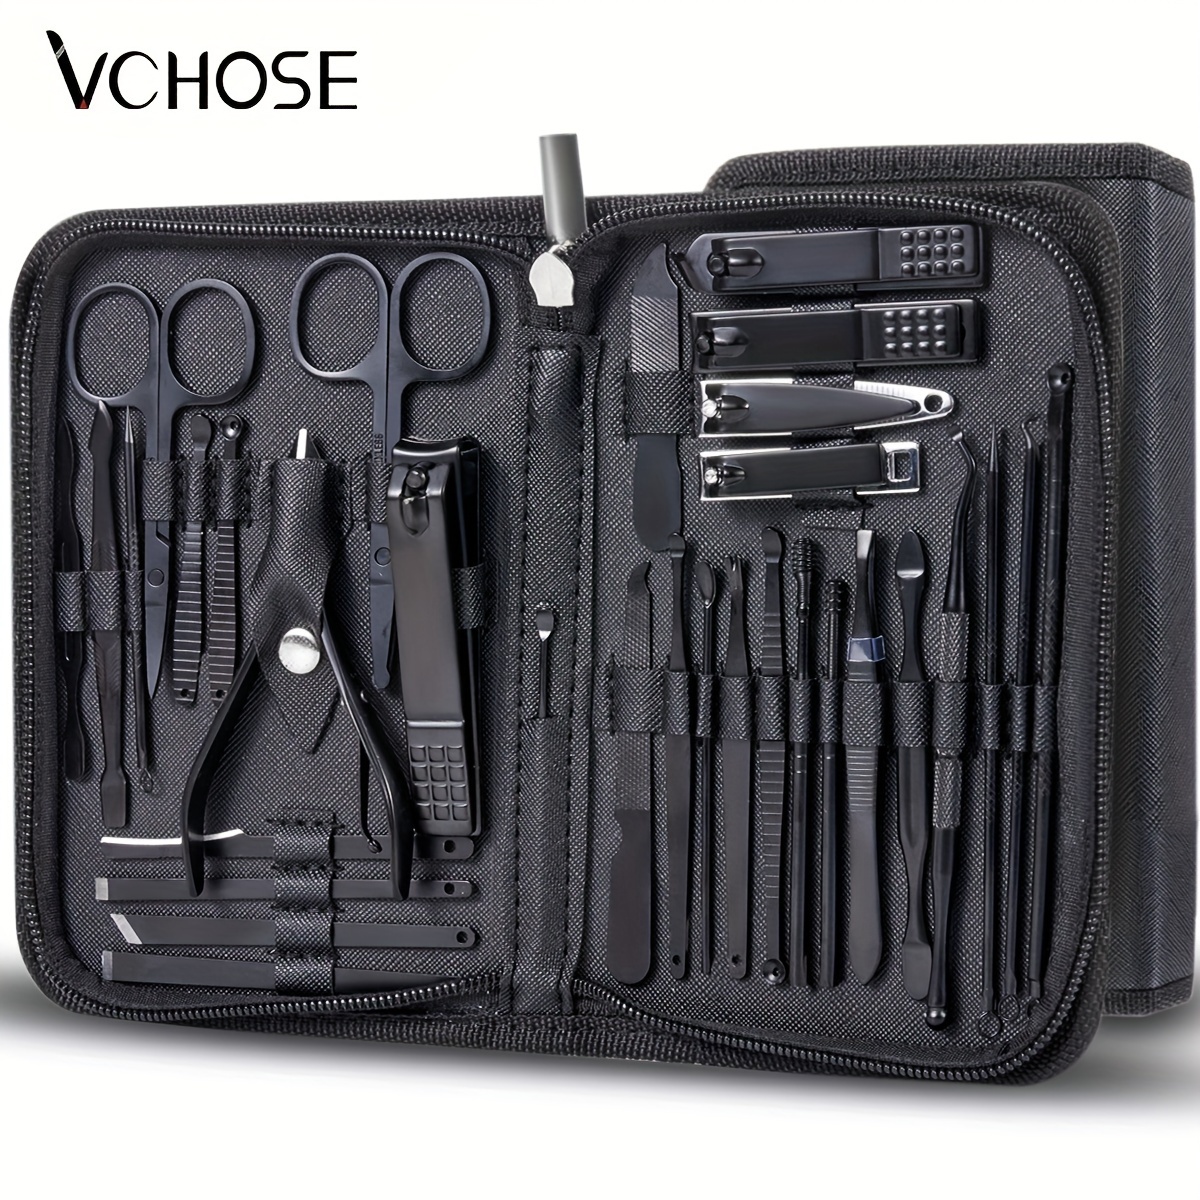 

7/32pcs Manicure Tool Set, Cuticle Nippers And Cutter Kit, Professional Nail Clippers Pedicure Kit, Nail Art Tools, Stainless Steel Grooming Kit For Travel